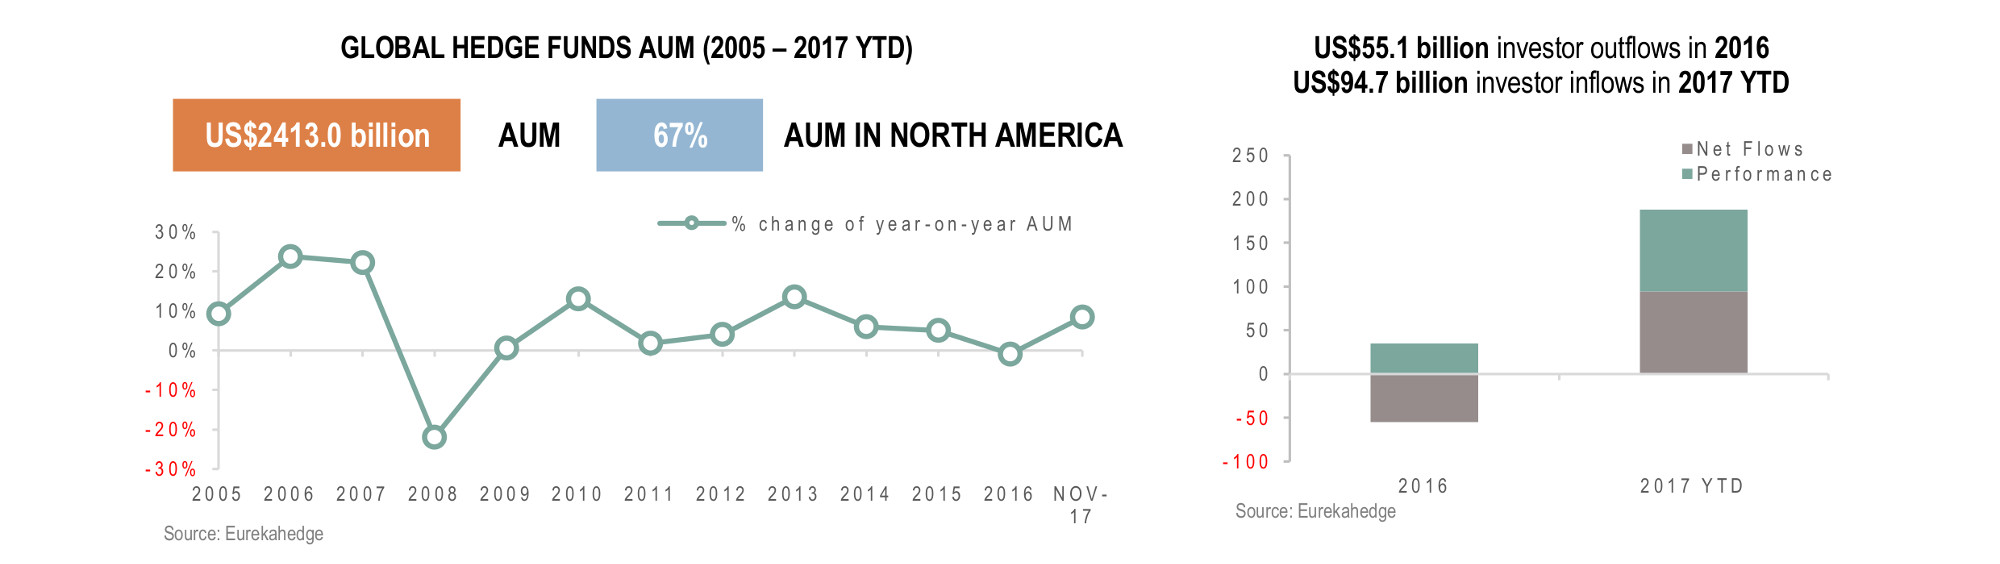 Global Hedge Funds Infographic January 2018 - AUM